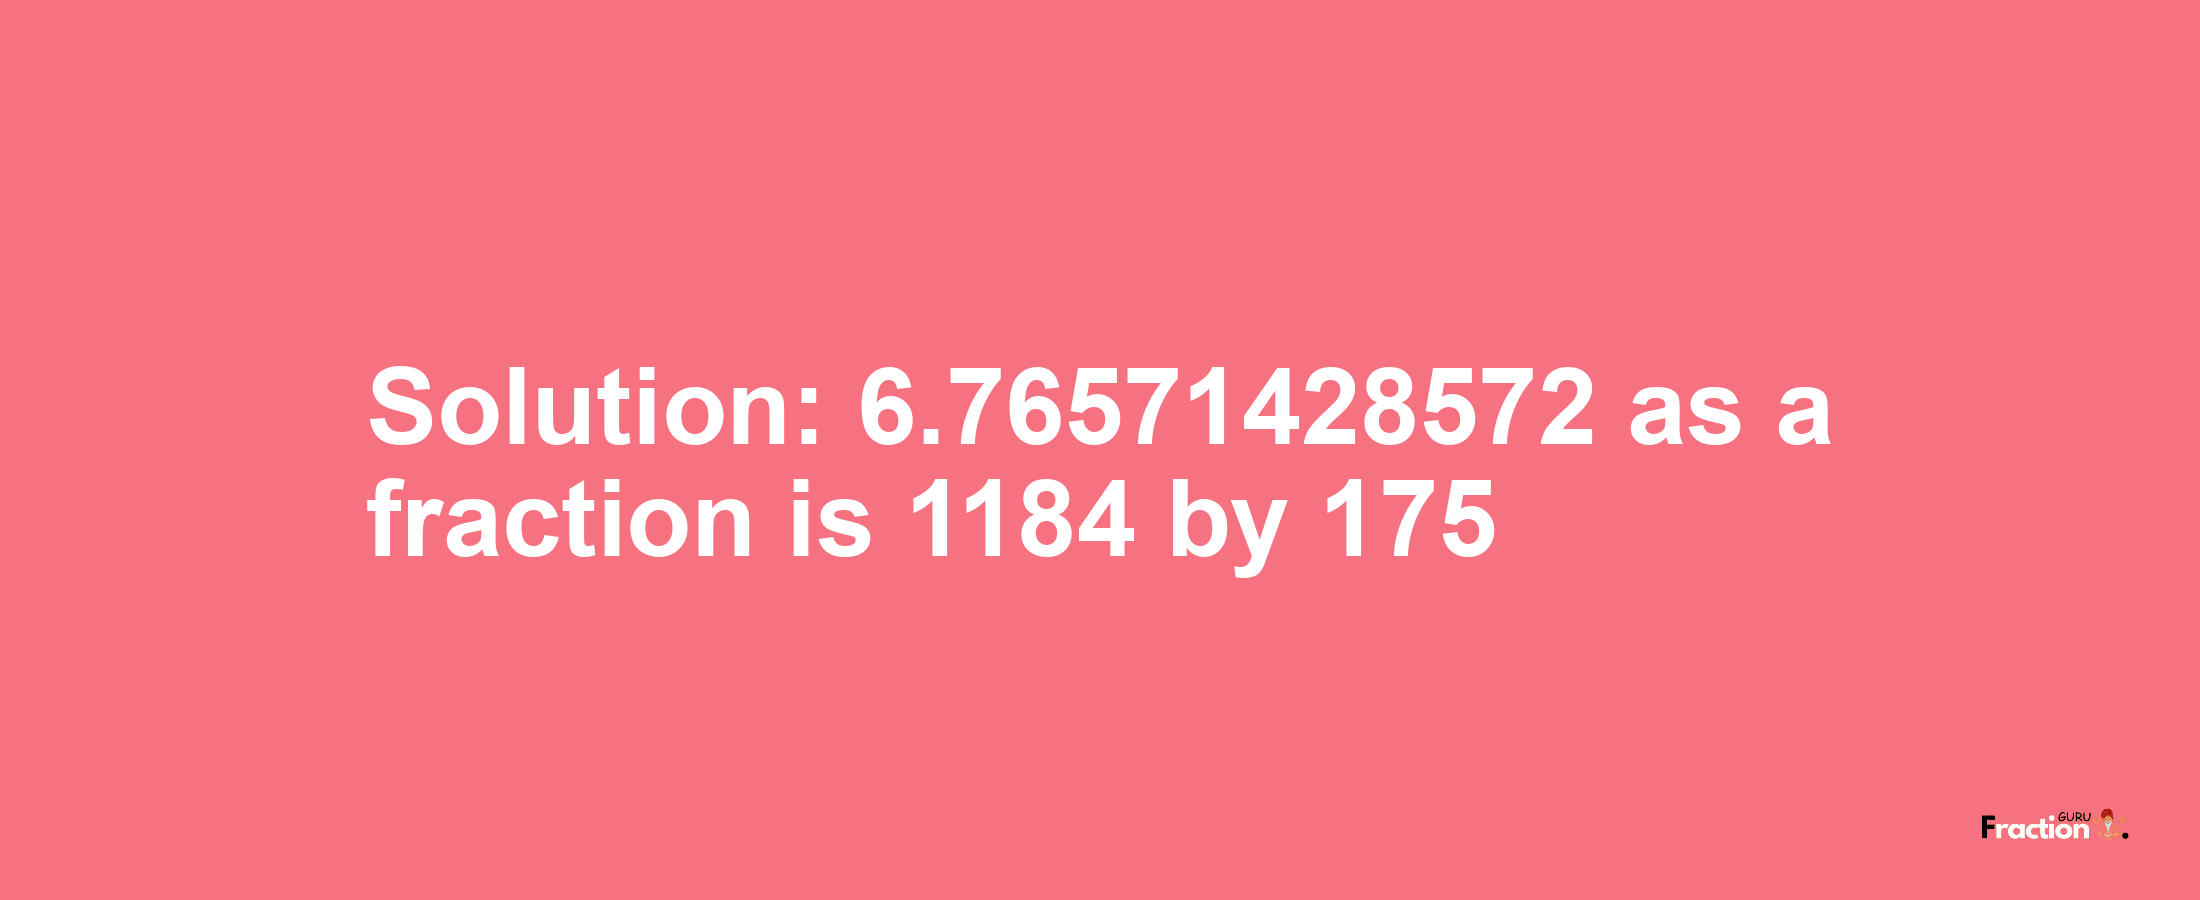 Solution:6.76571428572 as a fraction is 1184/175